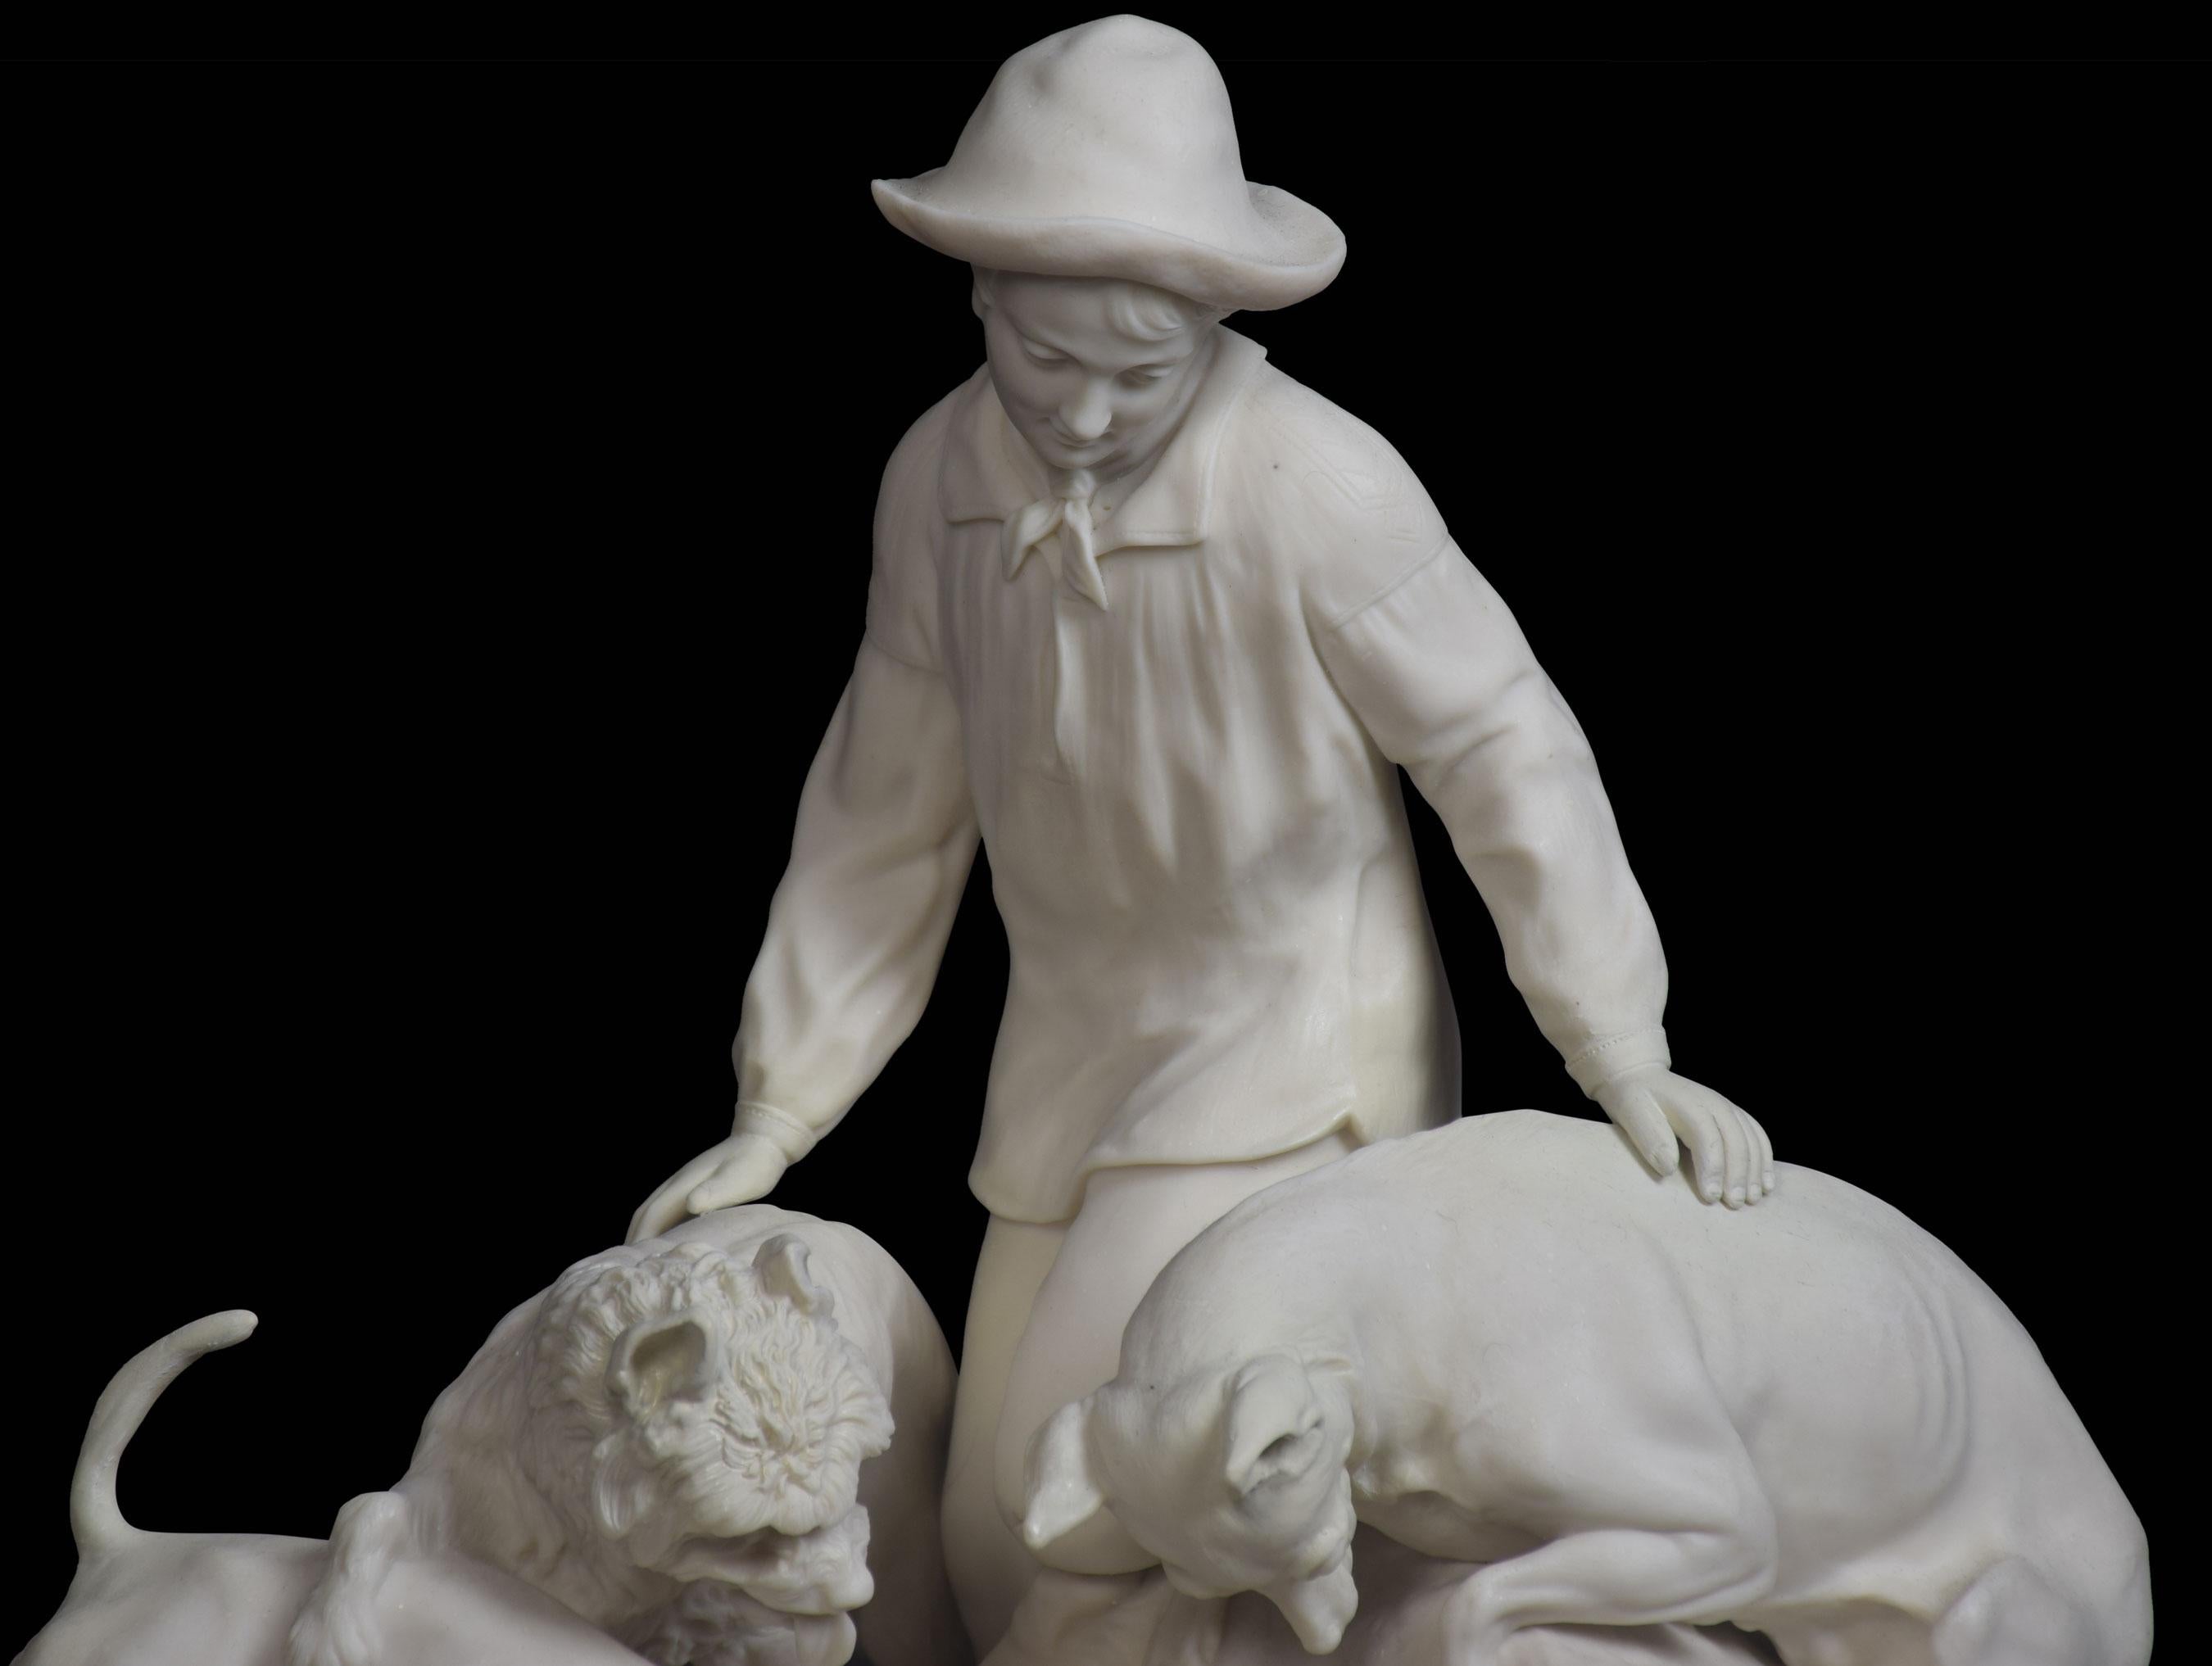 Parian group of a hunting scene depicting a man kneeling on a fallen tree with his dogs looking at a burrow.
Dimensions
Height 12.5 Inches
Width 13 Inches
Depth 6.5 Inches